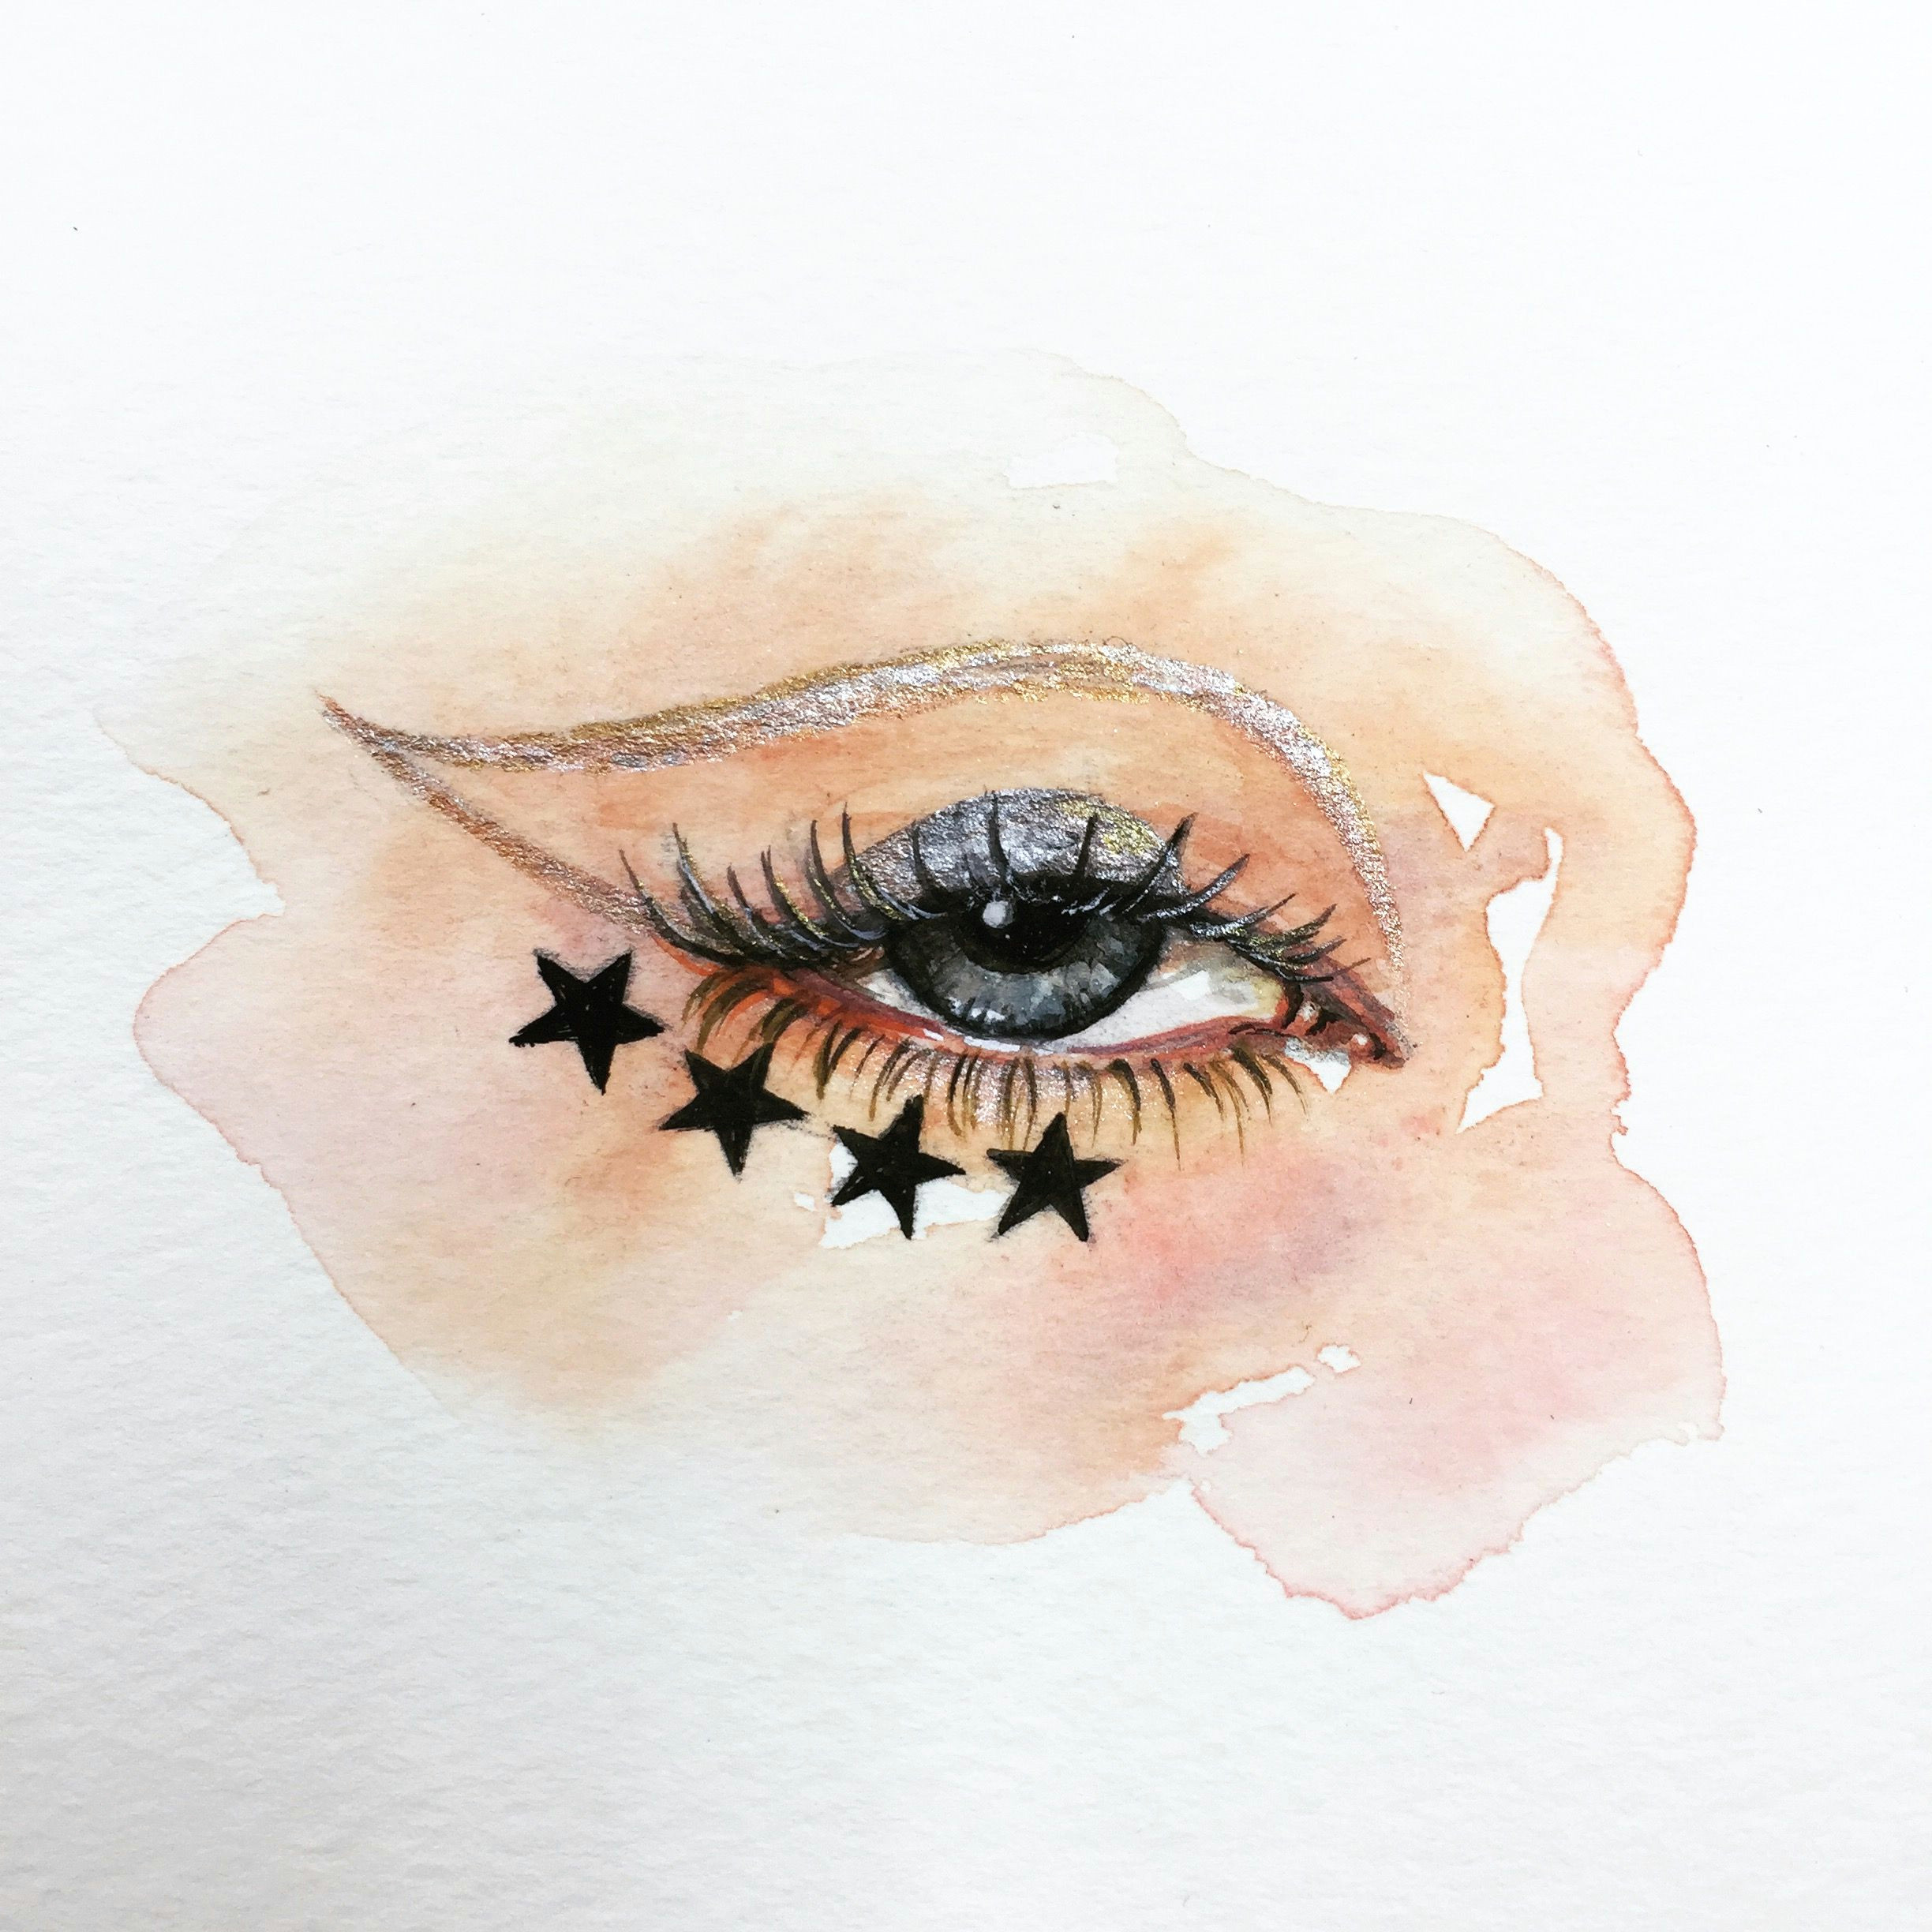 the 100 day project 41 100 100 days of eye drawing by oliviaumeiwa oliviaumeiwa art painting watercolor artist eye stars gold makeup